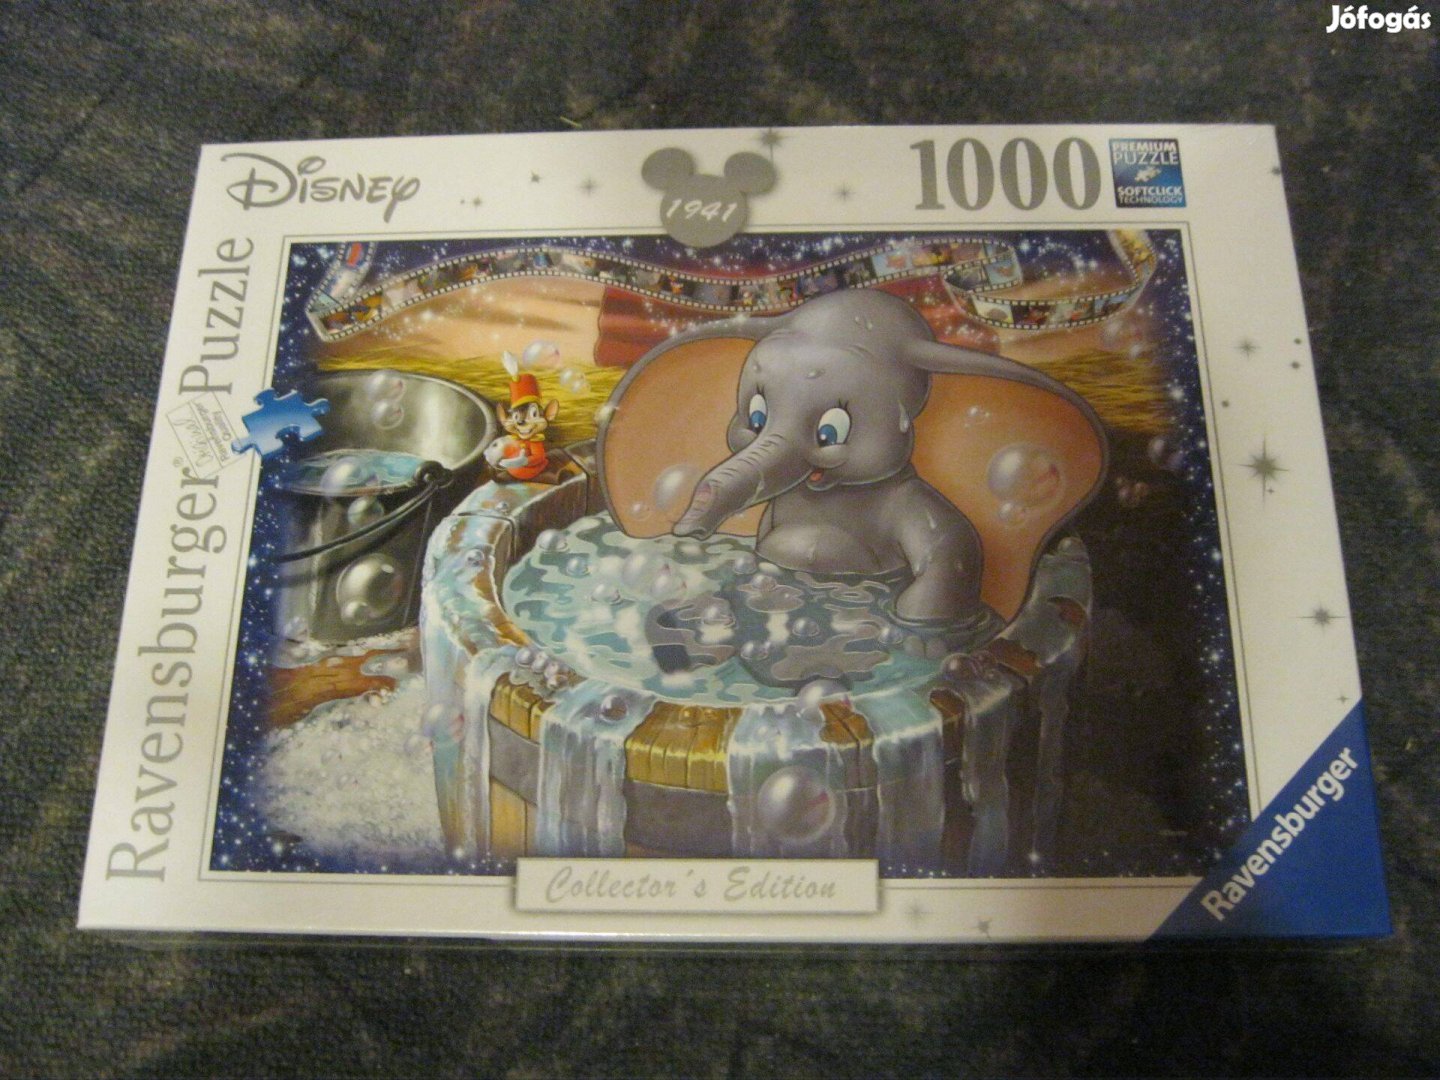 Ravensburger Disney Collector's Edition puzzle - Dumbo 1000 db-os